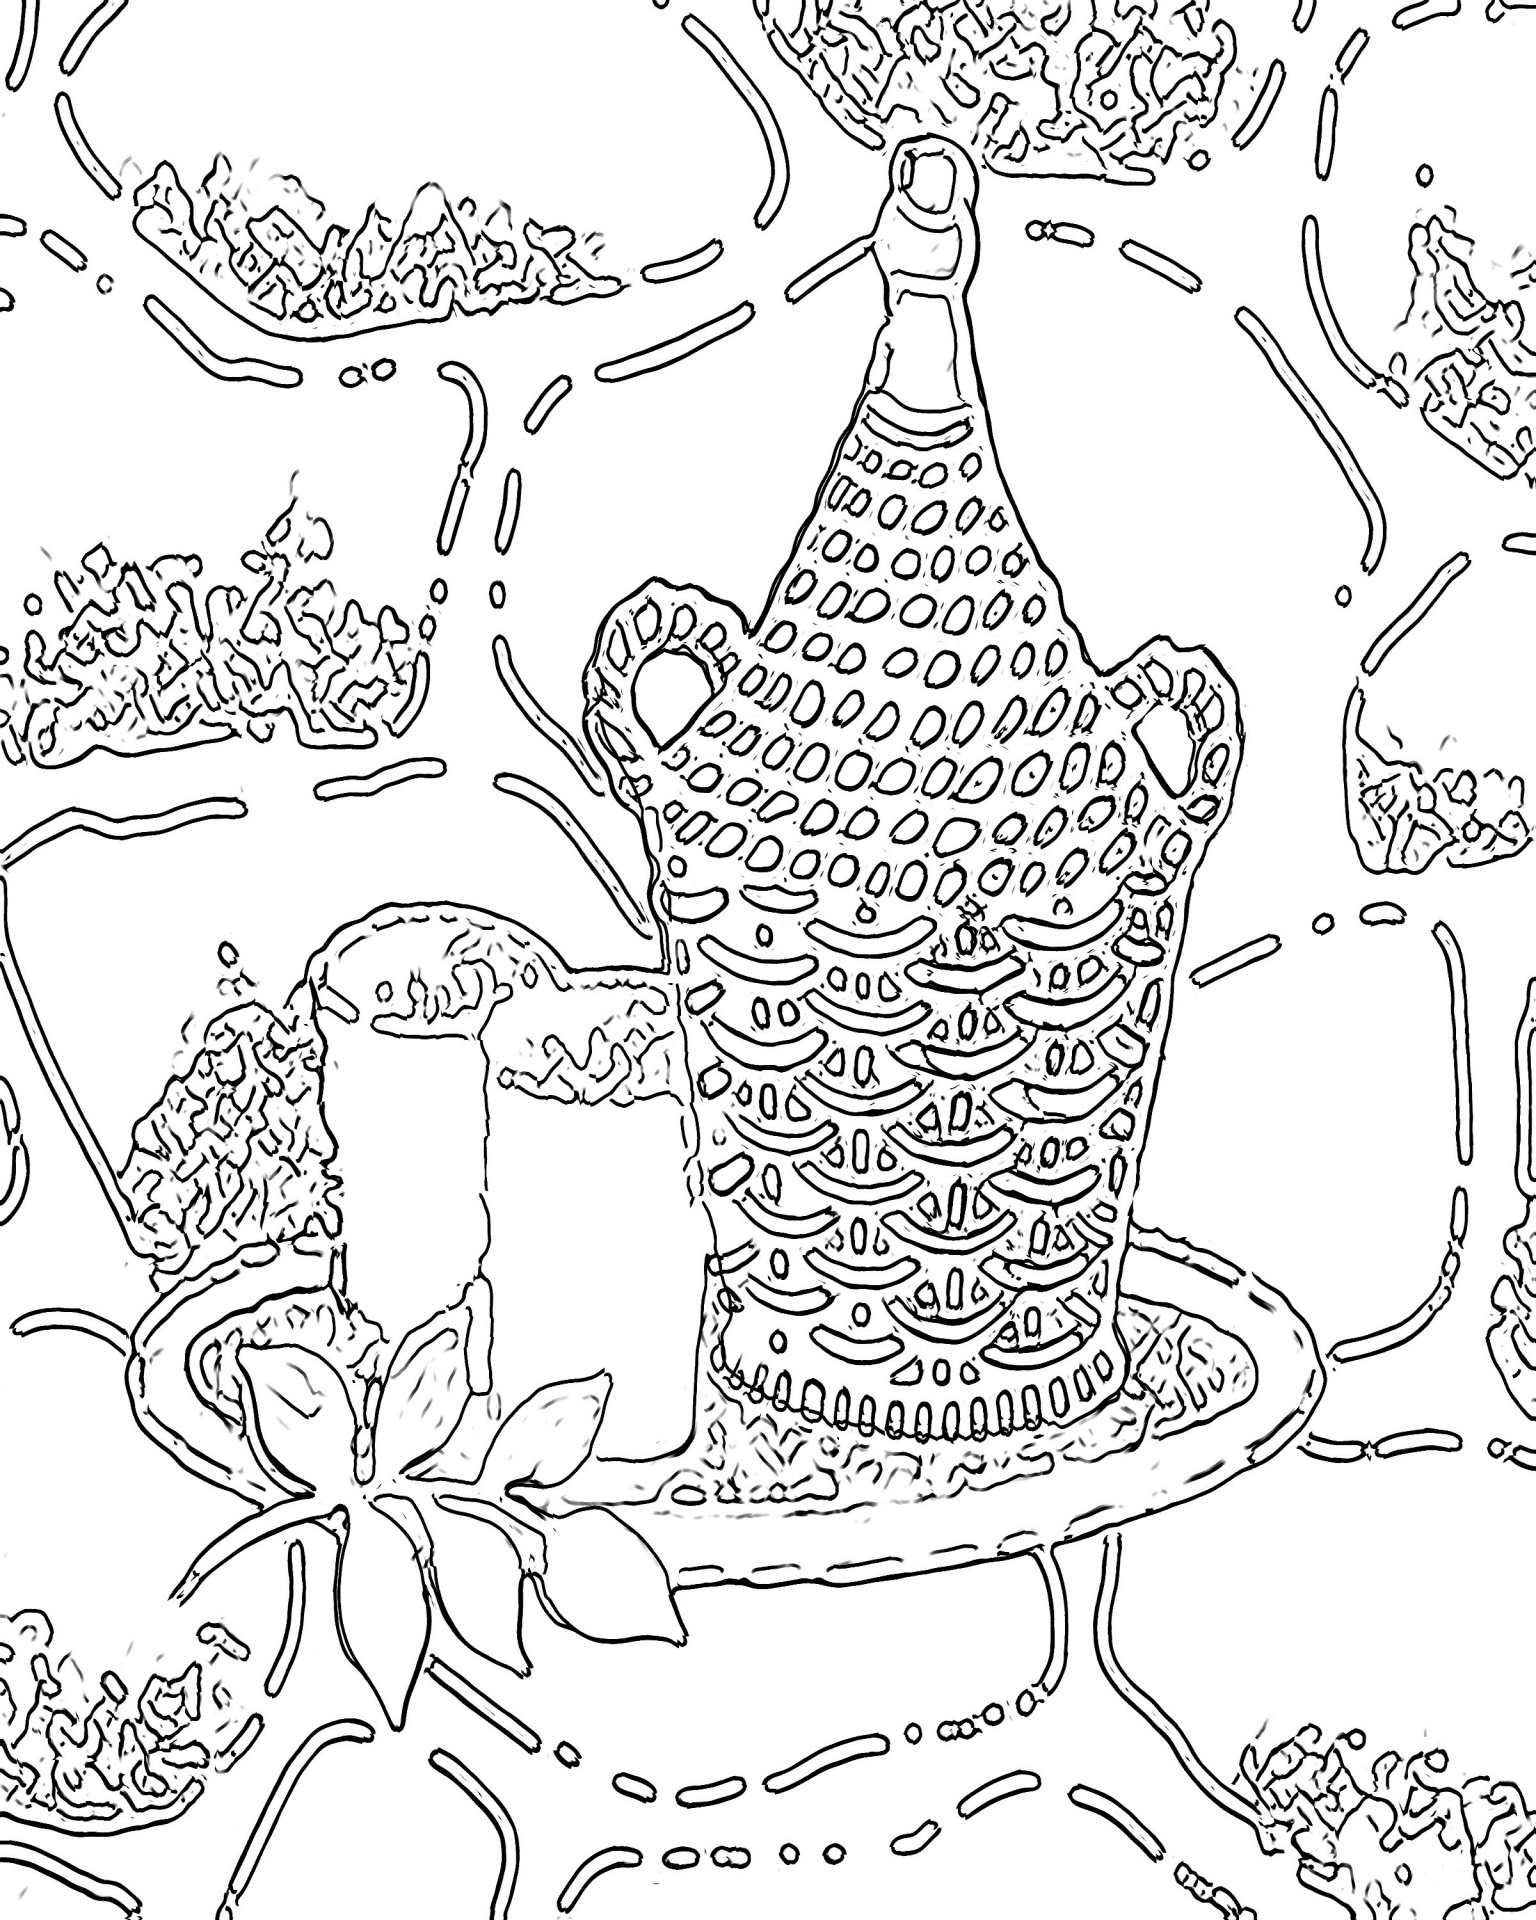 Free Printable Abstract Coloring Pages For Adults HD Wallpapers Download Free Images Wallpaper [wallpaper896.blogspot.com]